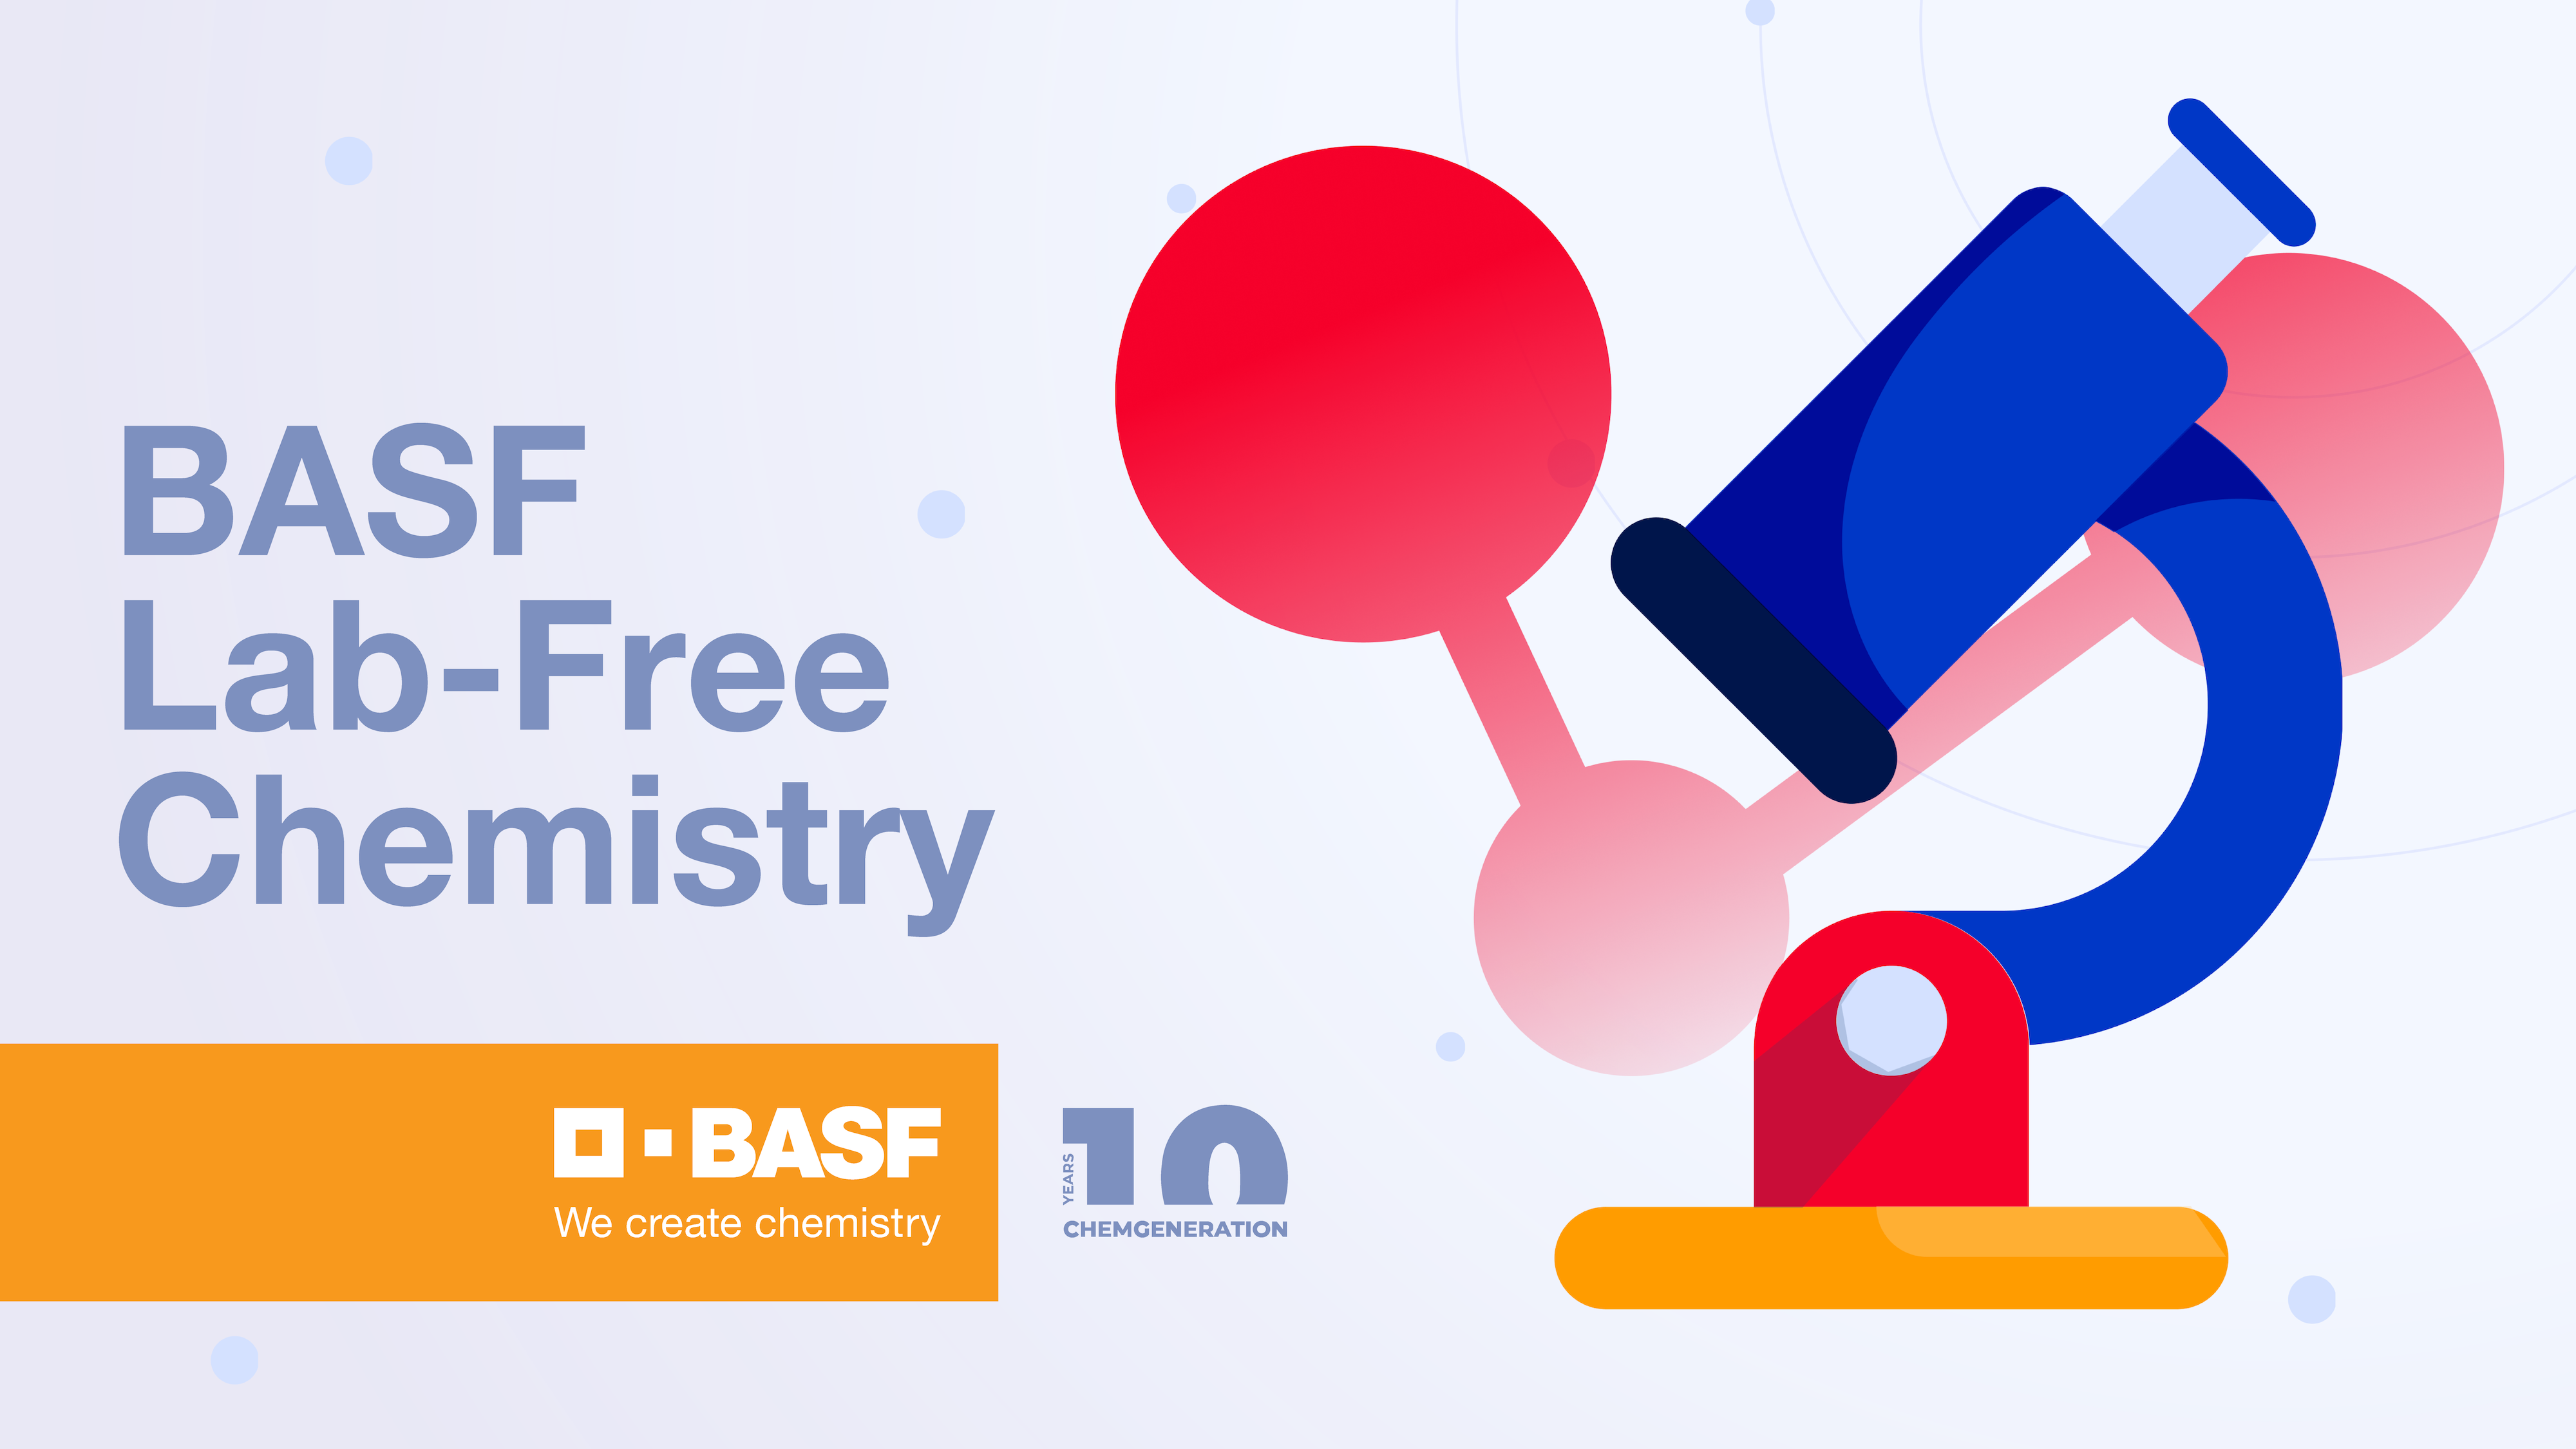 BASF in Romania launched free educational web app for performing real chemistry experiments at home